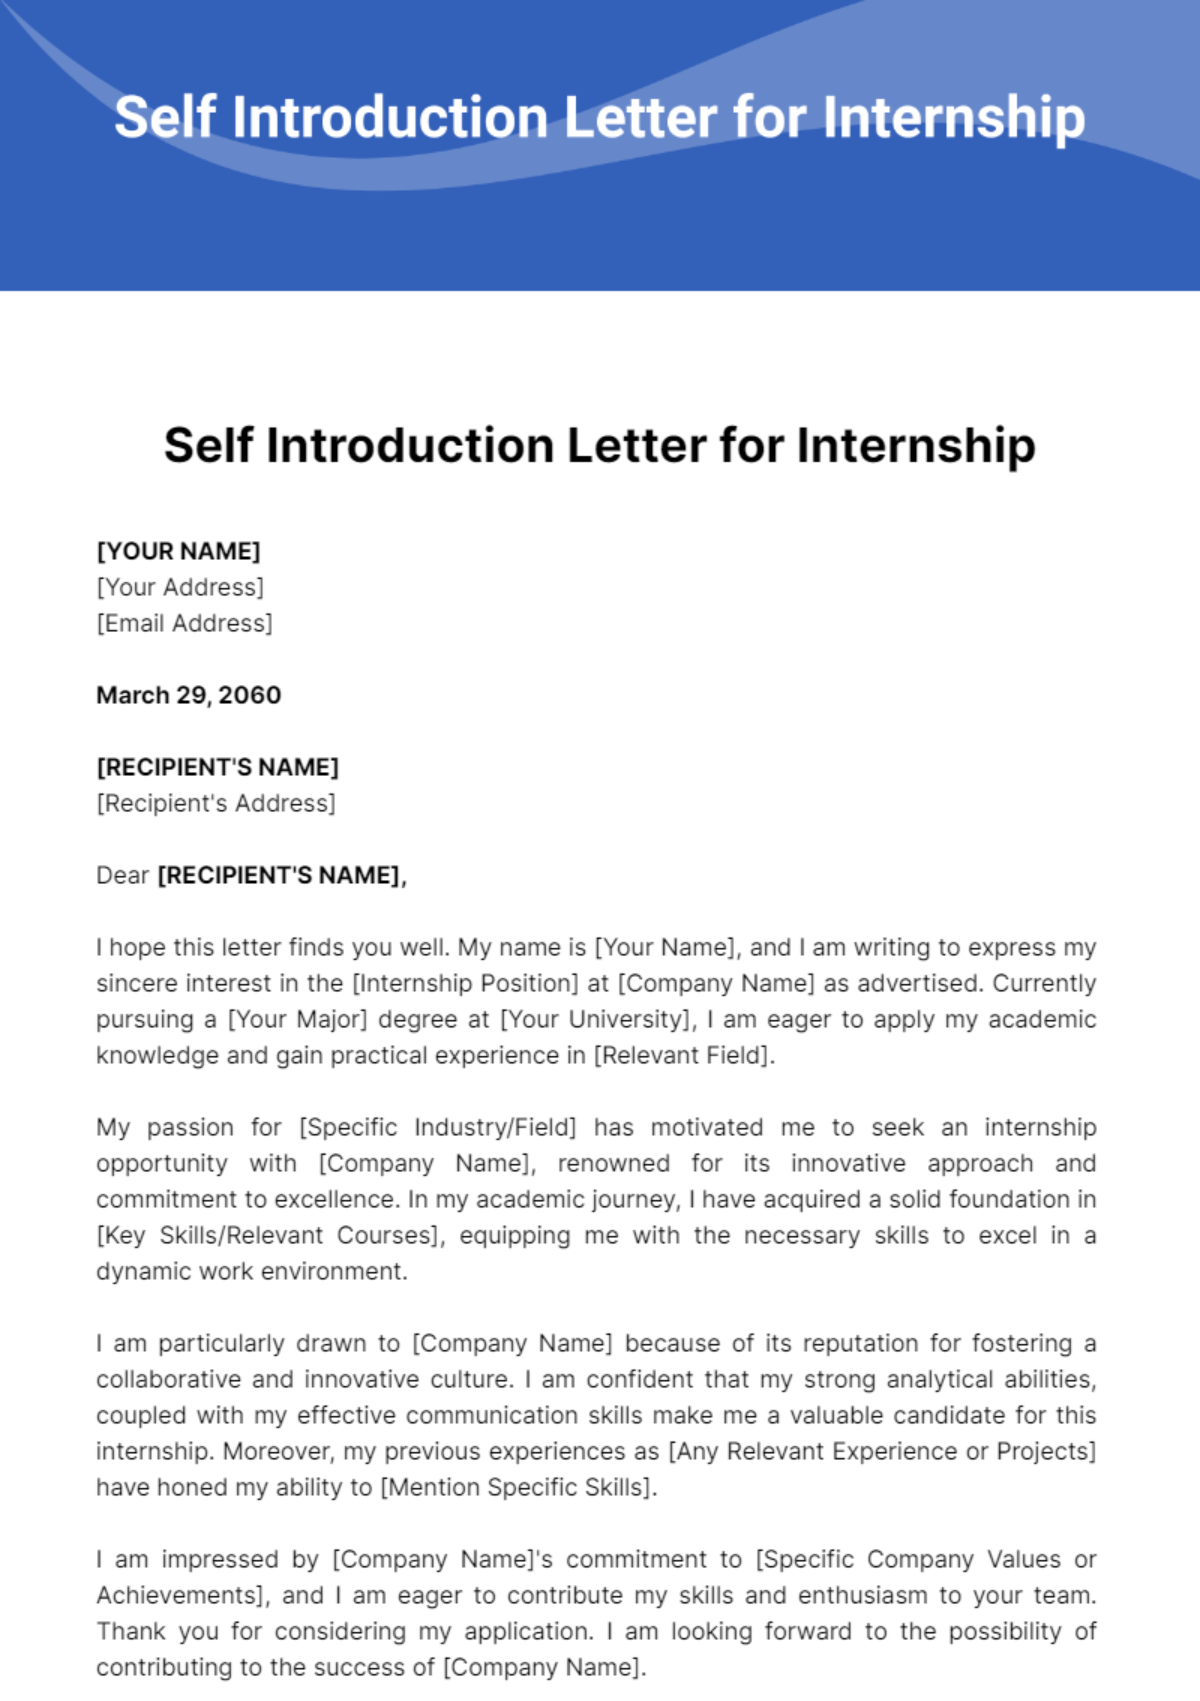 Free Self Introduction Letter for Internship Template